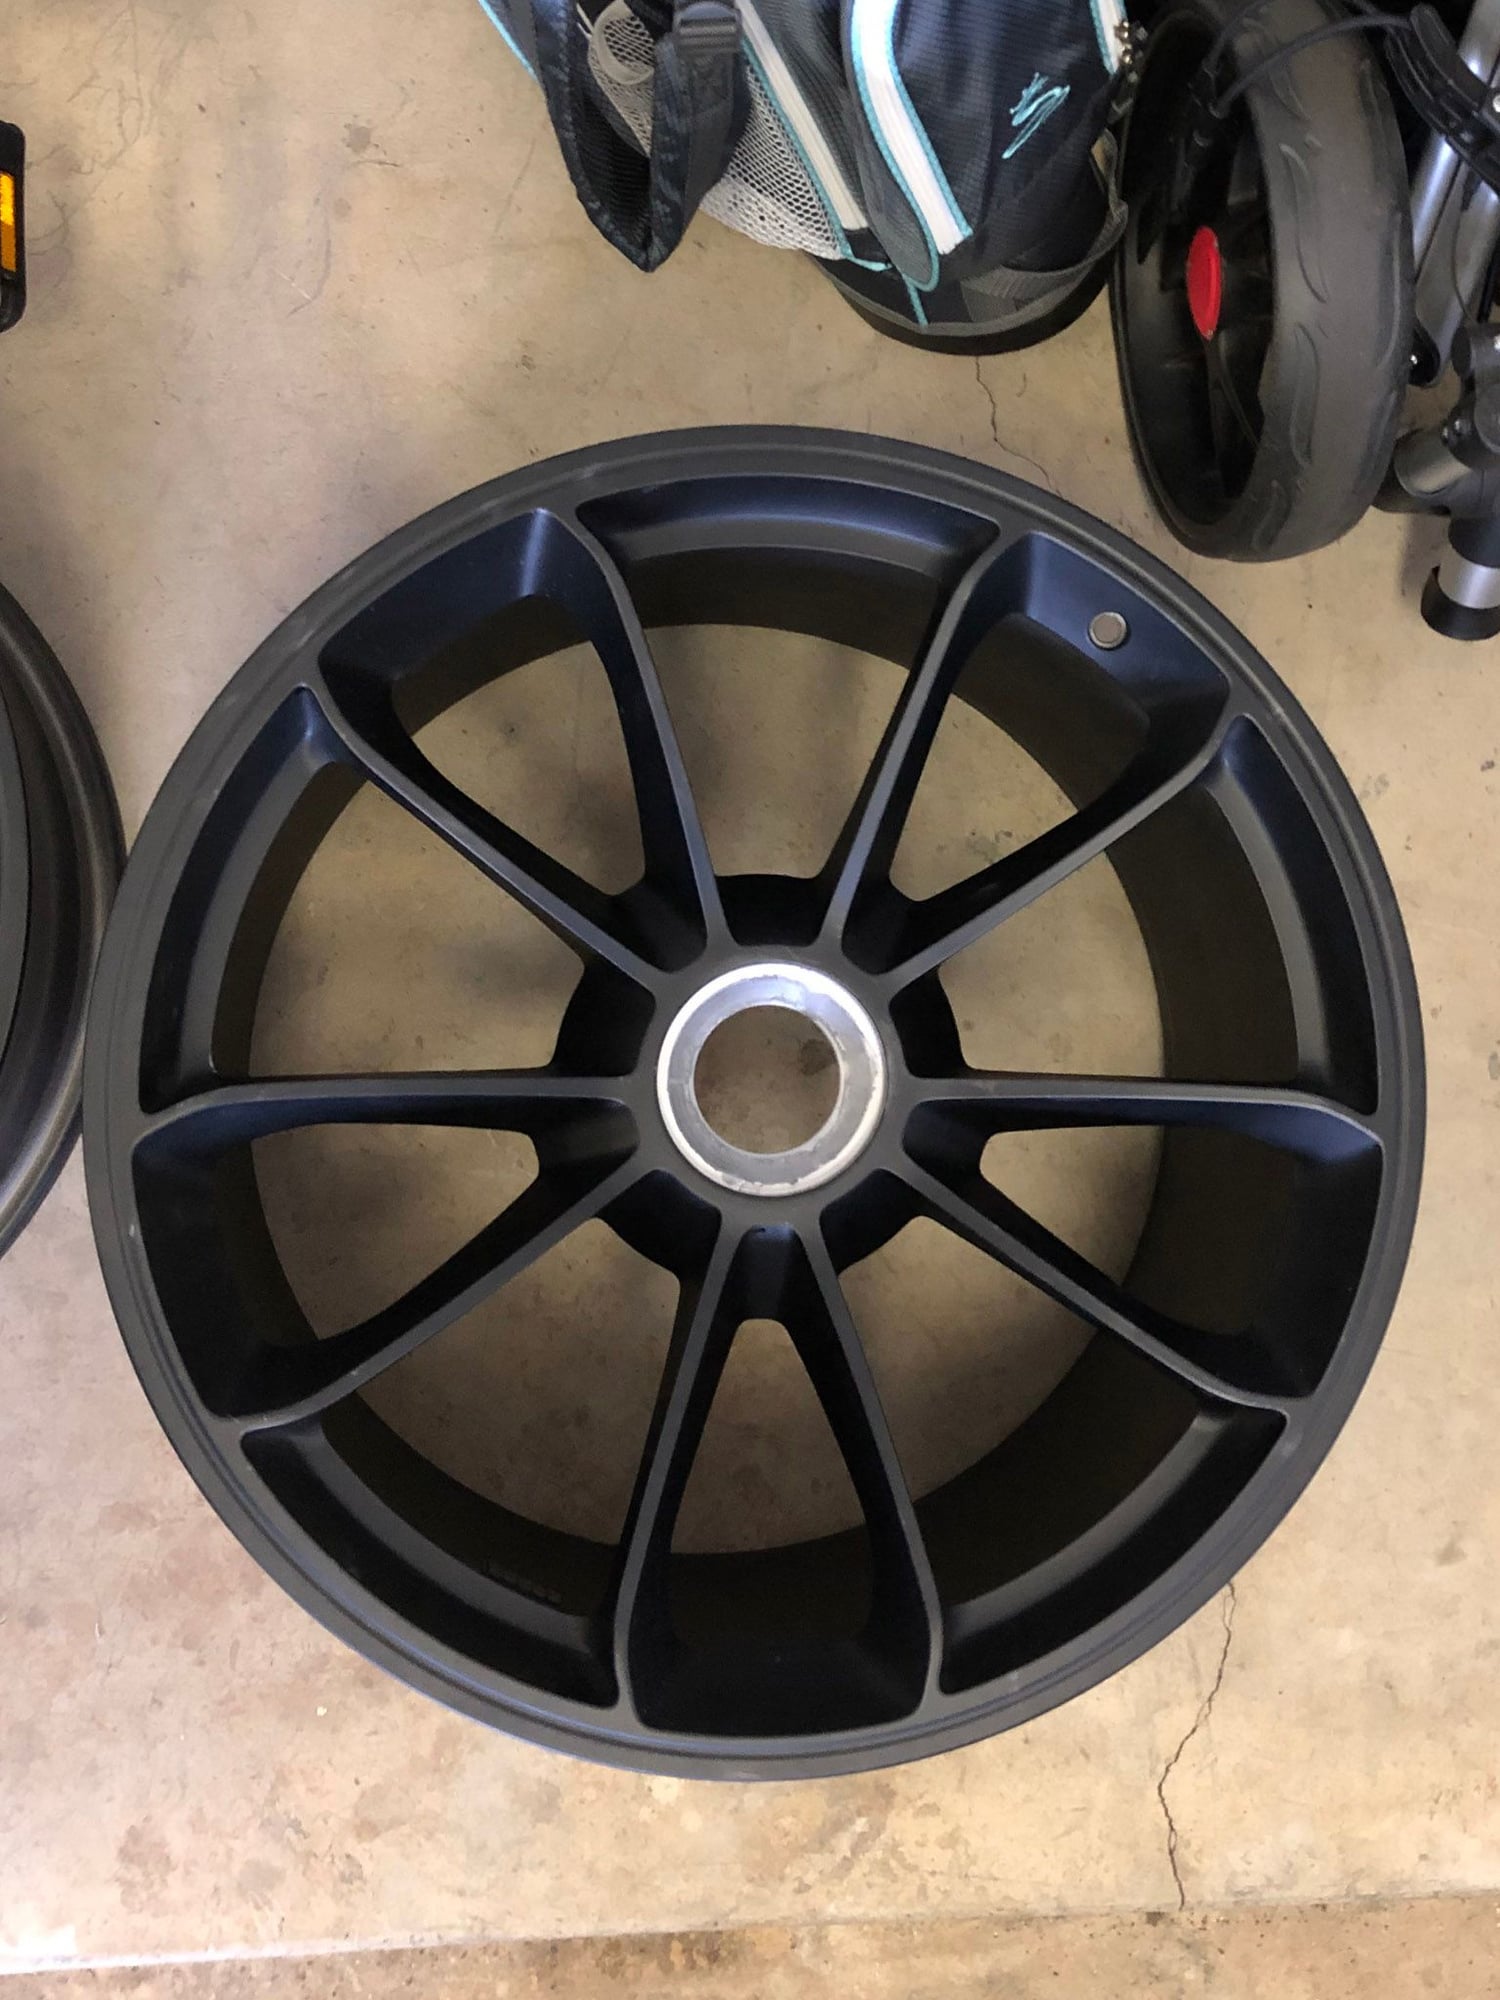 Wheels and Tires/Axles - OEM wheels in matte black for 991.2 GT3 - Used - 2013 to 2019 Porsche GT3 - Arcadia, CA 91007, United States